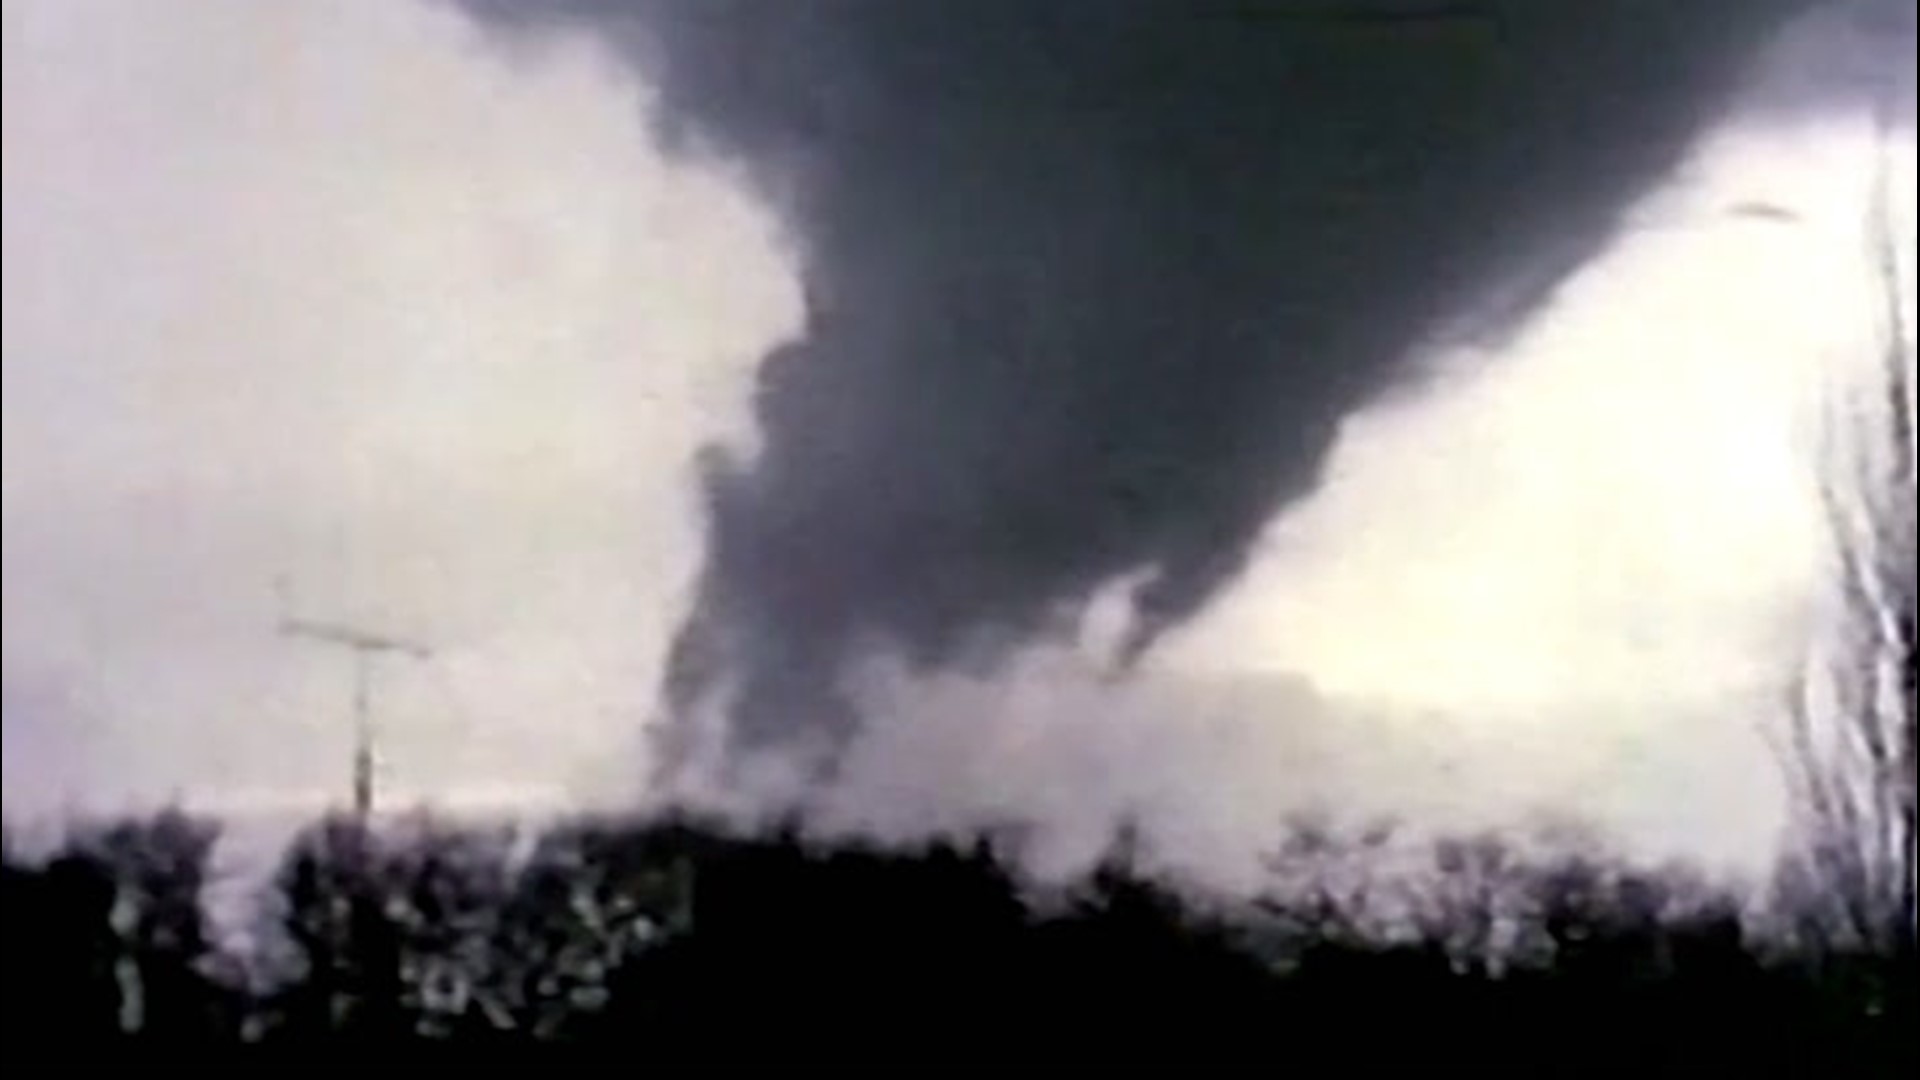 In just under 24 hours, 148 tornadoes caused 315 fatalities and injured over 5,000 people across 13 states. Known as the Super Outbreak, this event set the precedent for tornado research and forecasts.